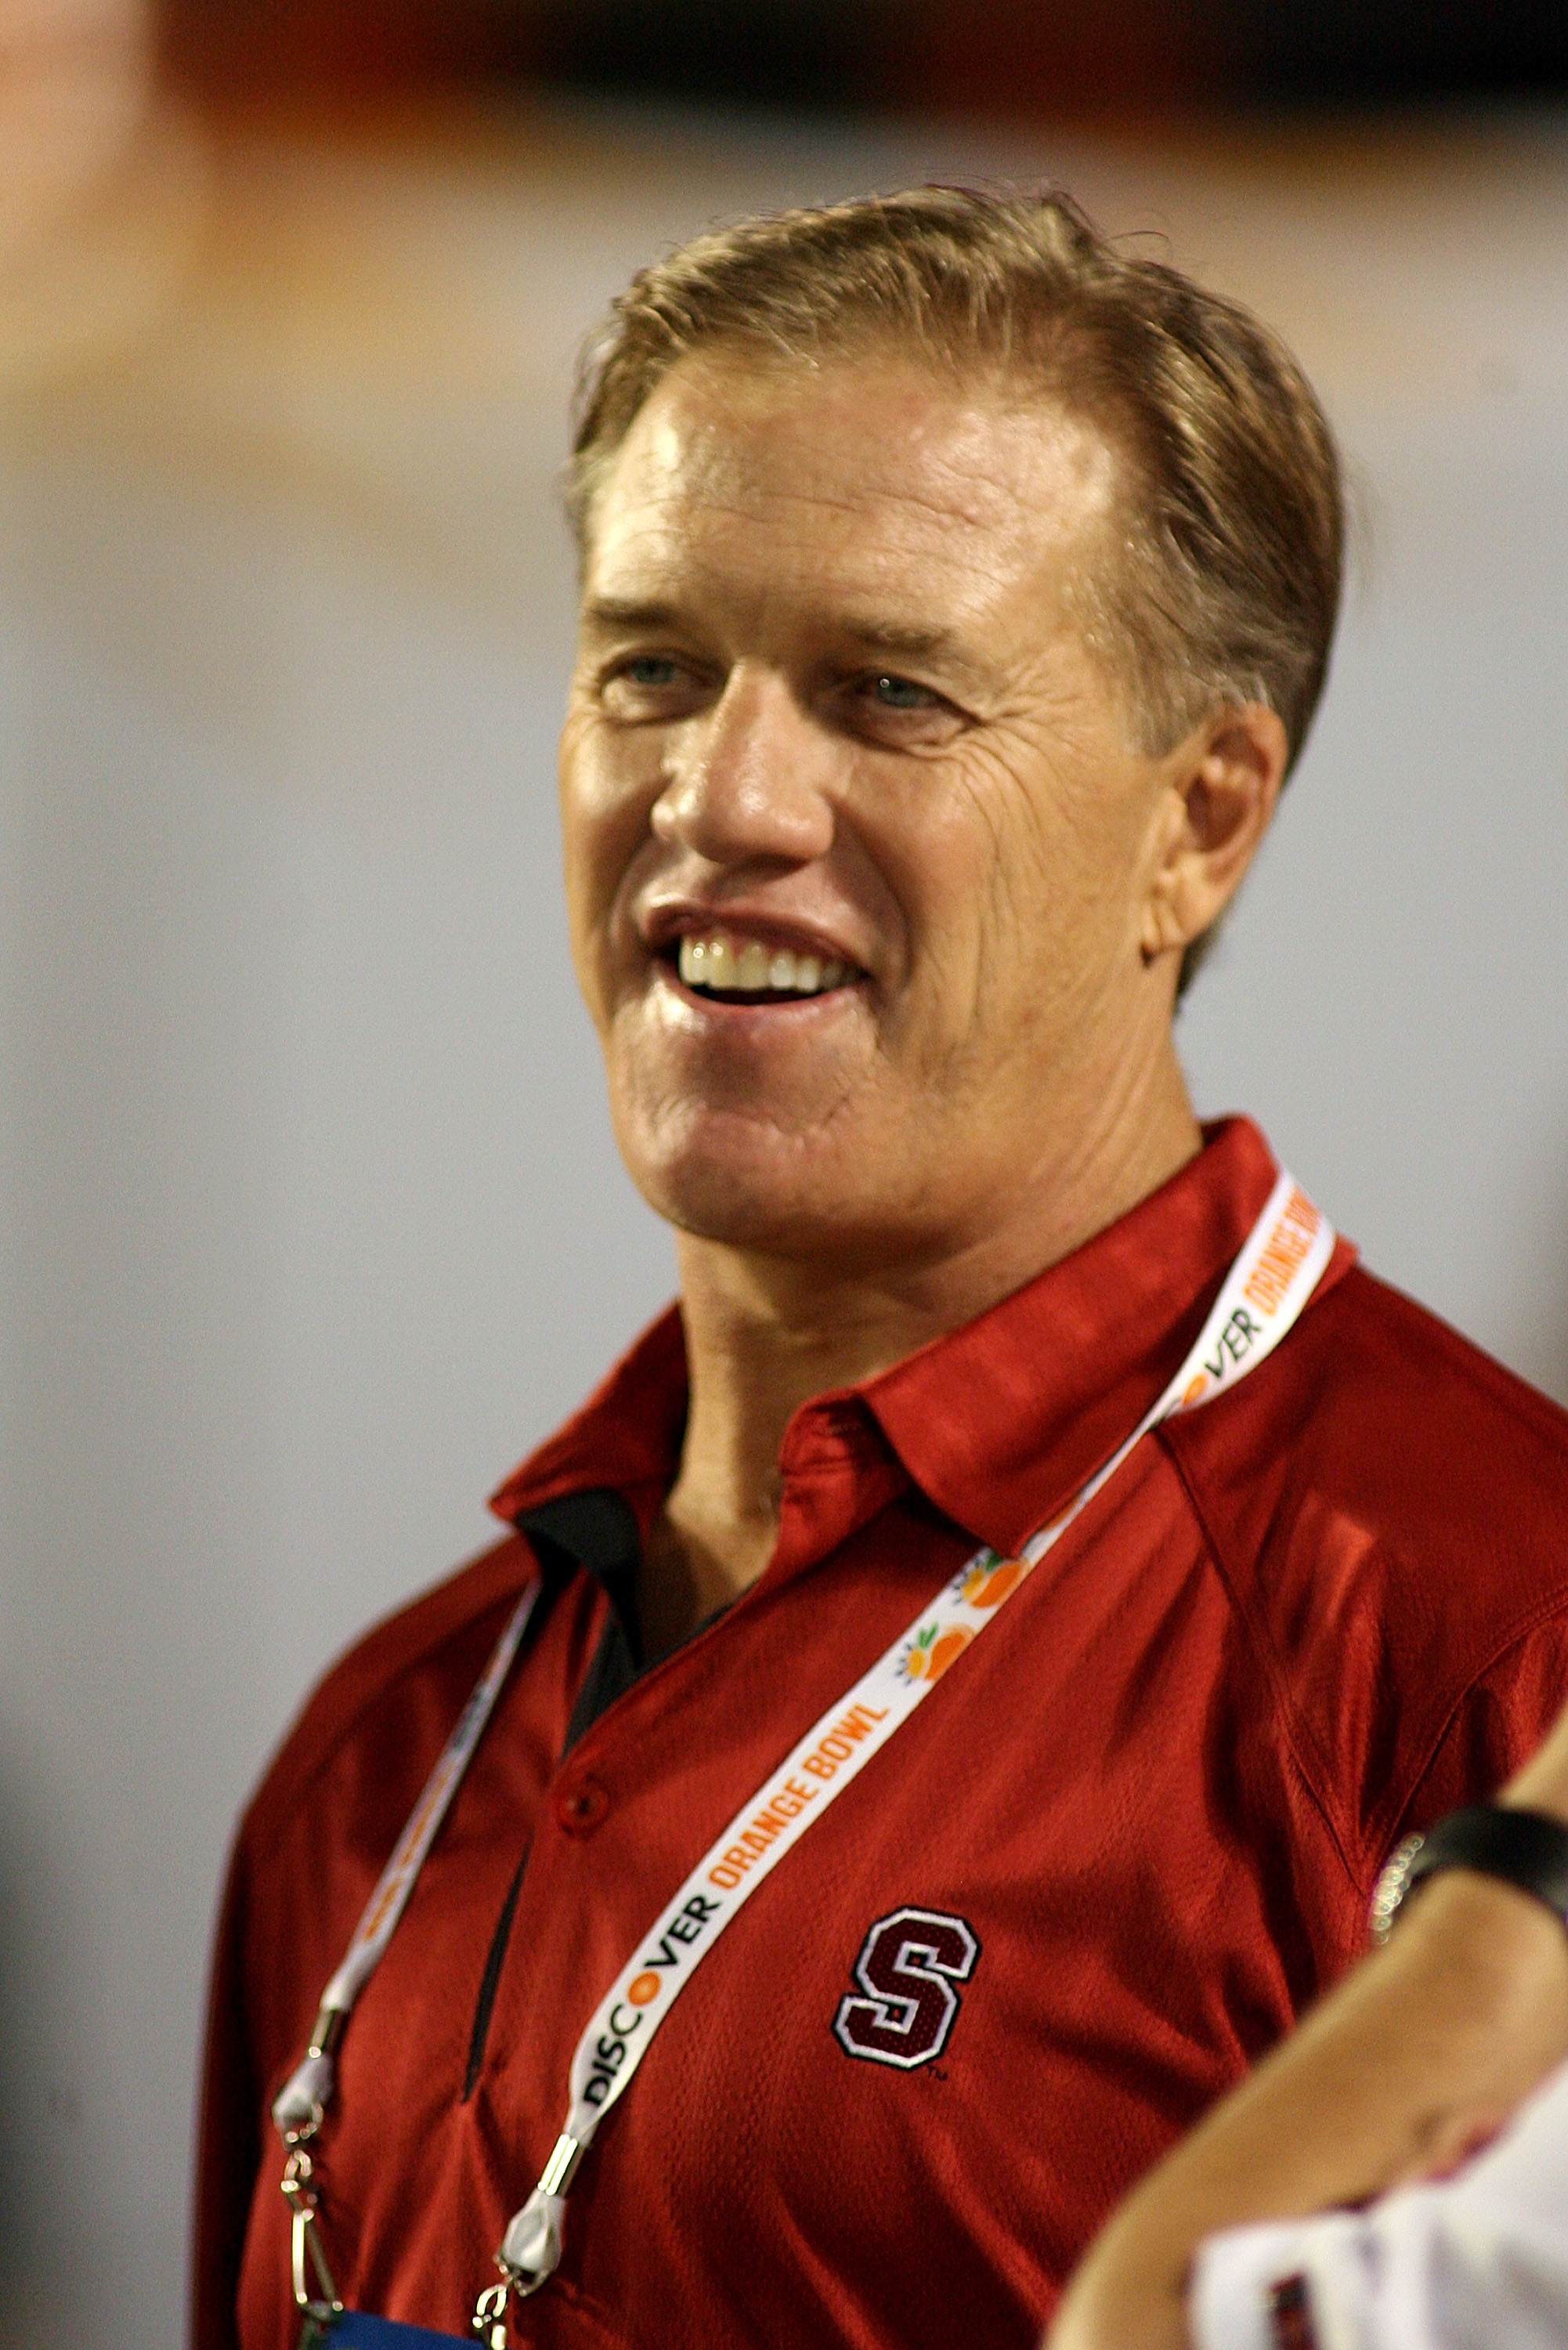 MIAMI, FL - JANUARY 03:  Stanford alum John Elway stands on the Stanford Cardinal sideline against the Virginai Tech Hokies during the 2011 Discover Orange Bowl at Sun Life Stadium on January 3, 2011 in Miami, Florida.  (Photo by Marc Serota/Getty Images)